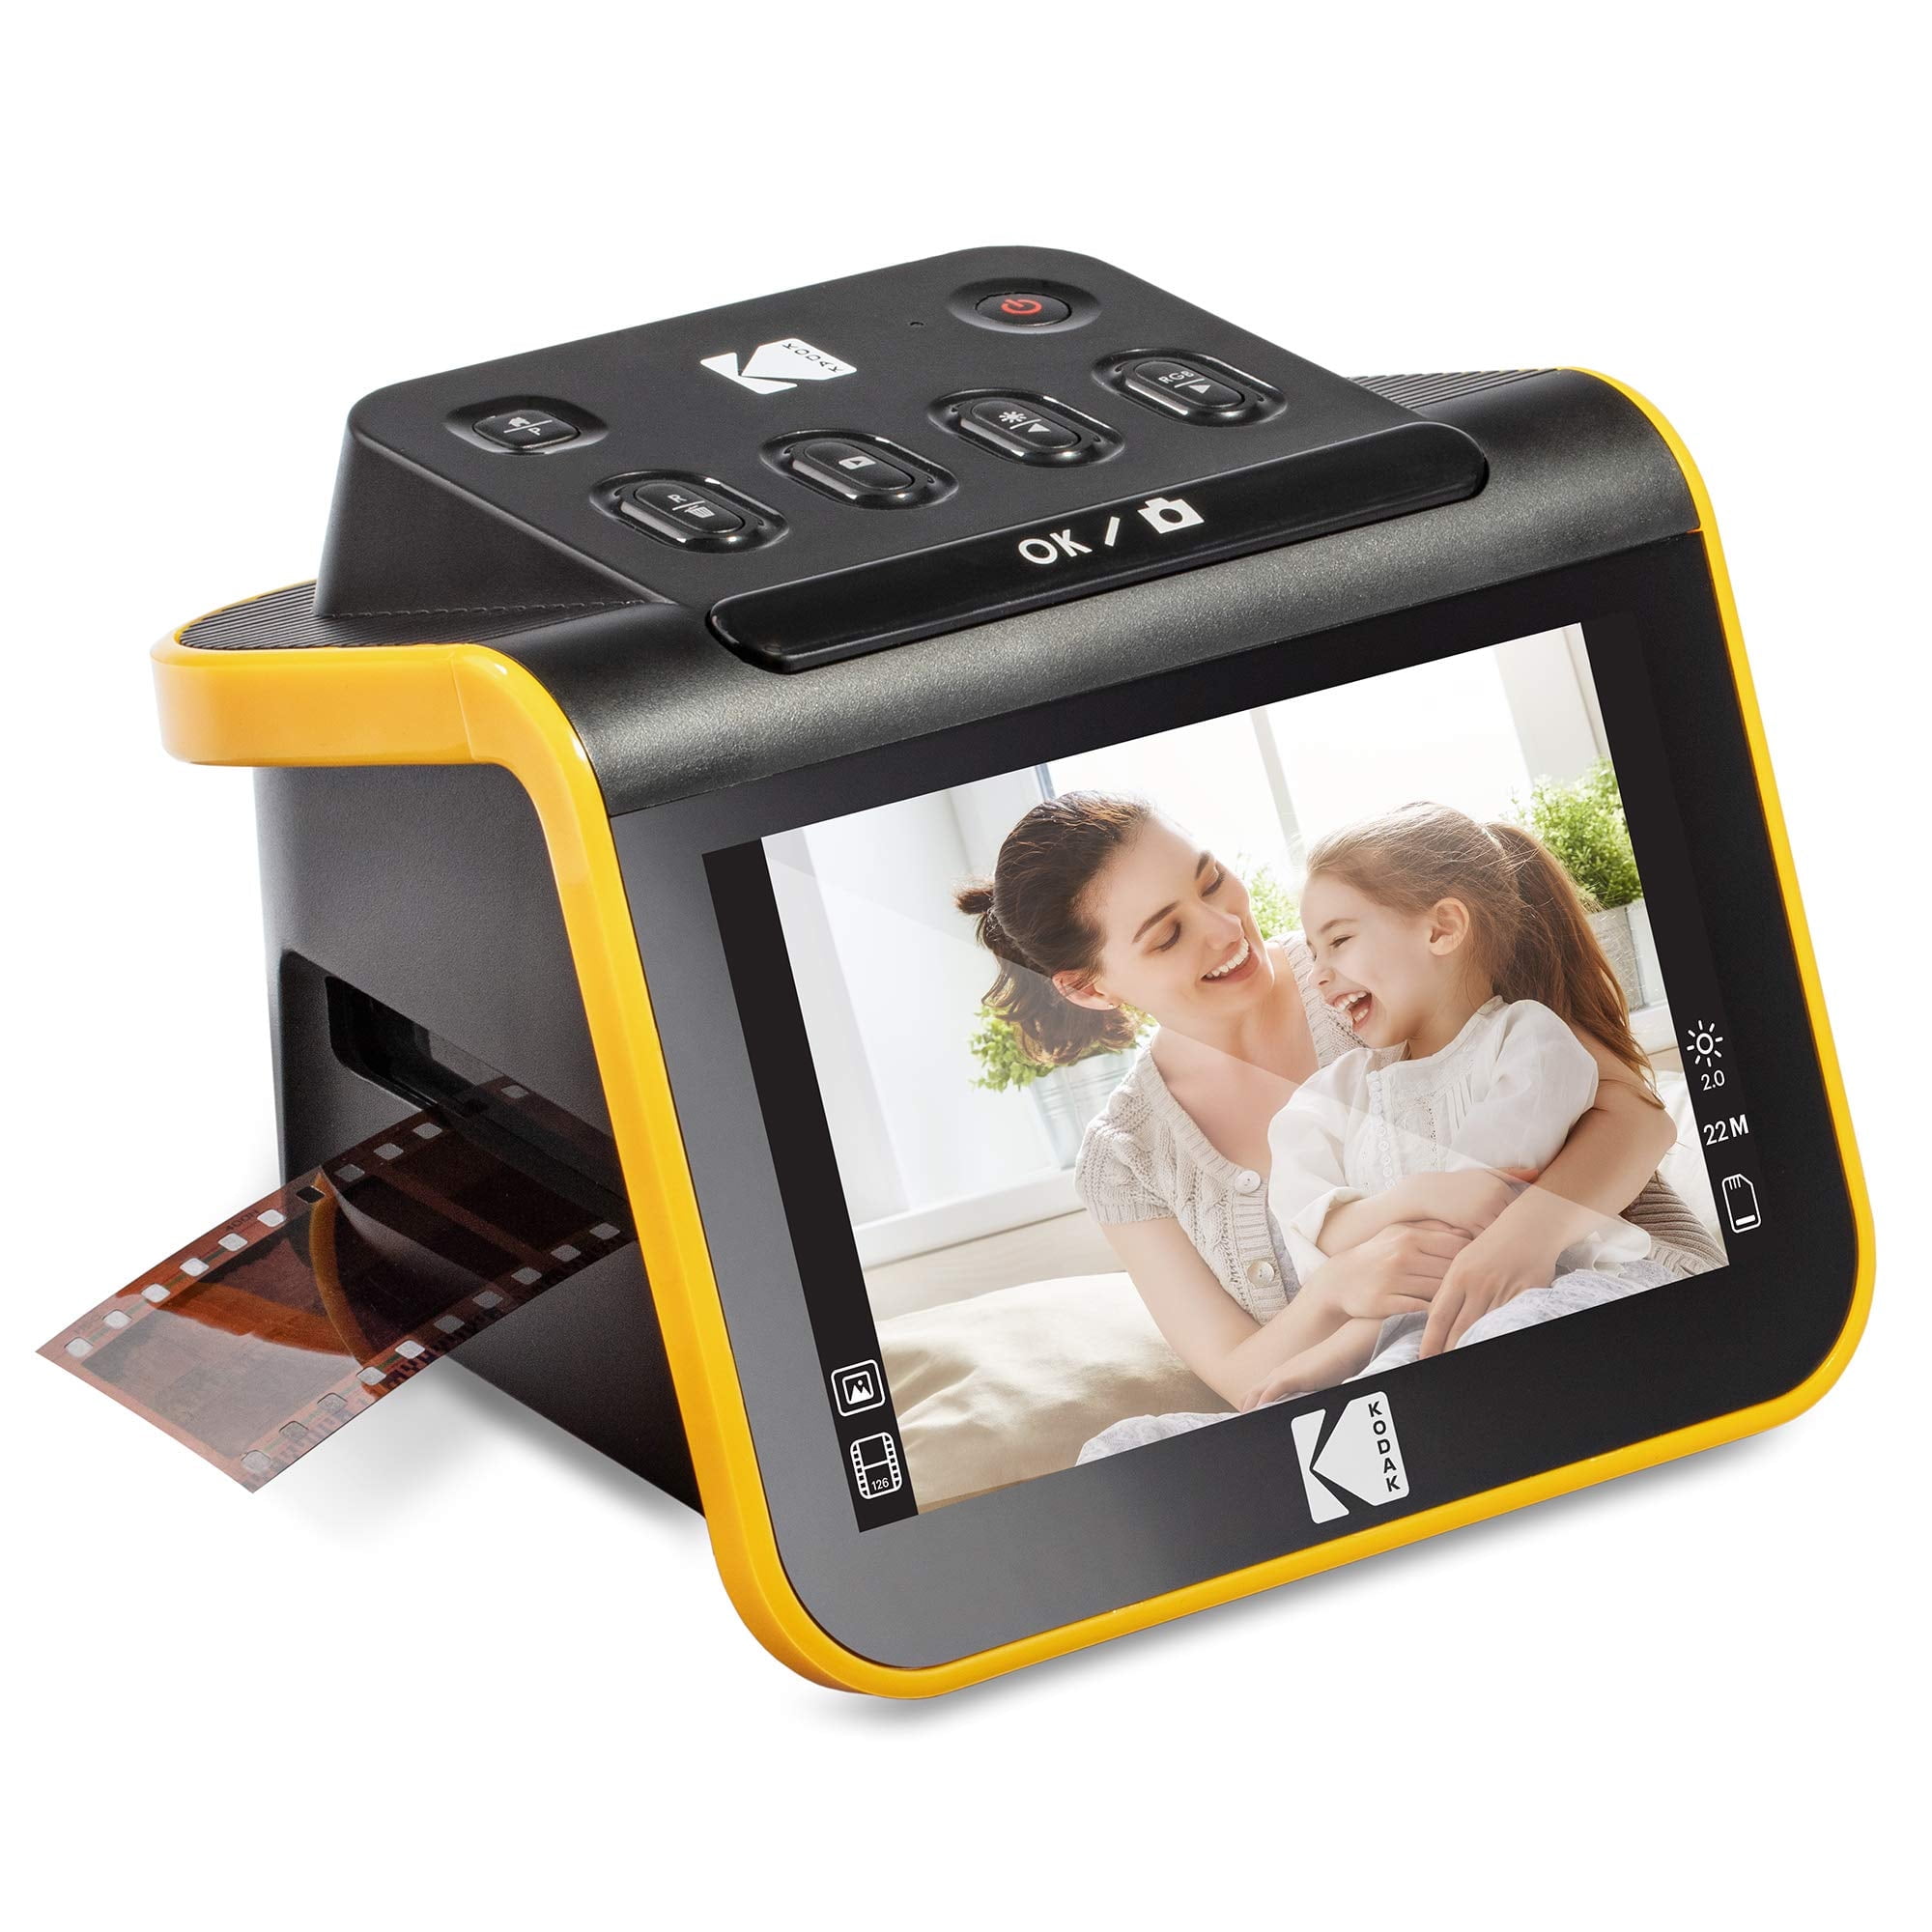 KODAK REELZ 8mm & Super 8 Films Digitizer Converter with Big 5” Screen,  Scanner Converts Film Frame by Frame to Digital MP4 Files for Viewing,  Sharing & Saving on SD Card for